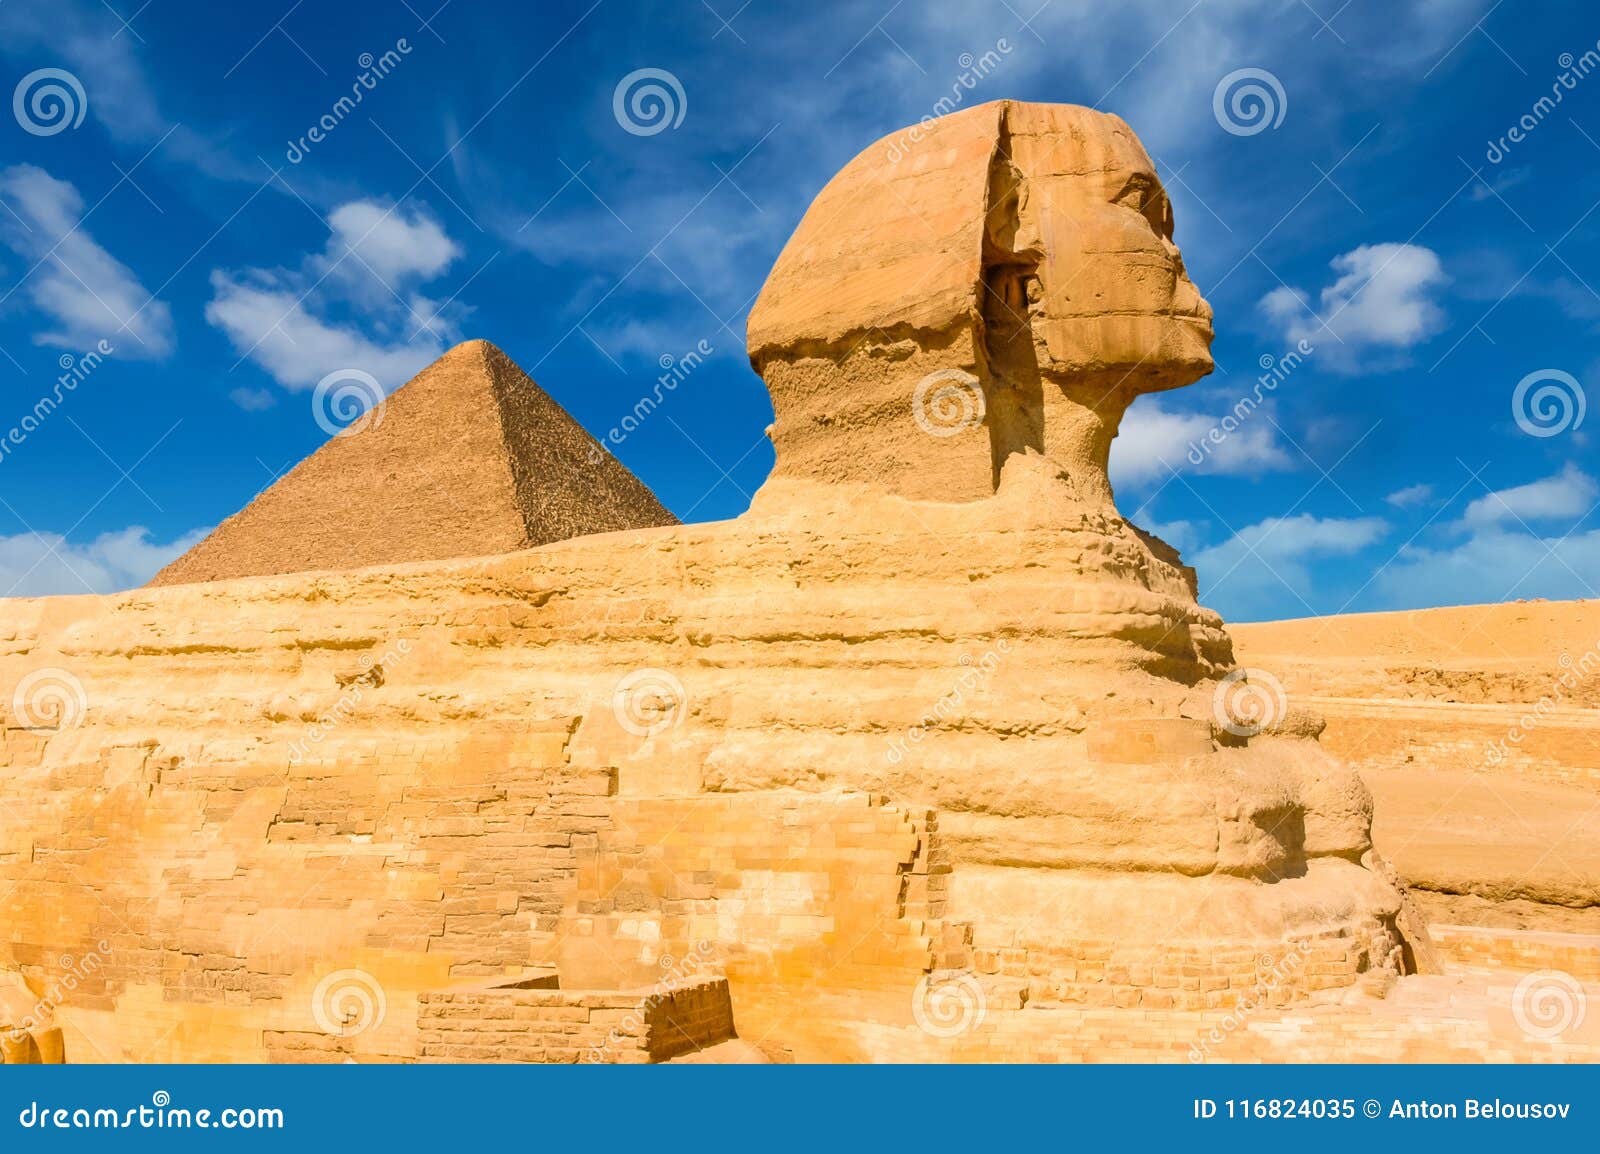 egyptian sphinx. cairo. giza. egypt. travel background. architectural monument. the tombs of the pharaohs. vacation holidays back